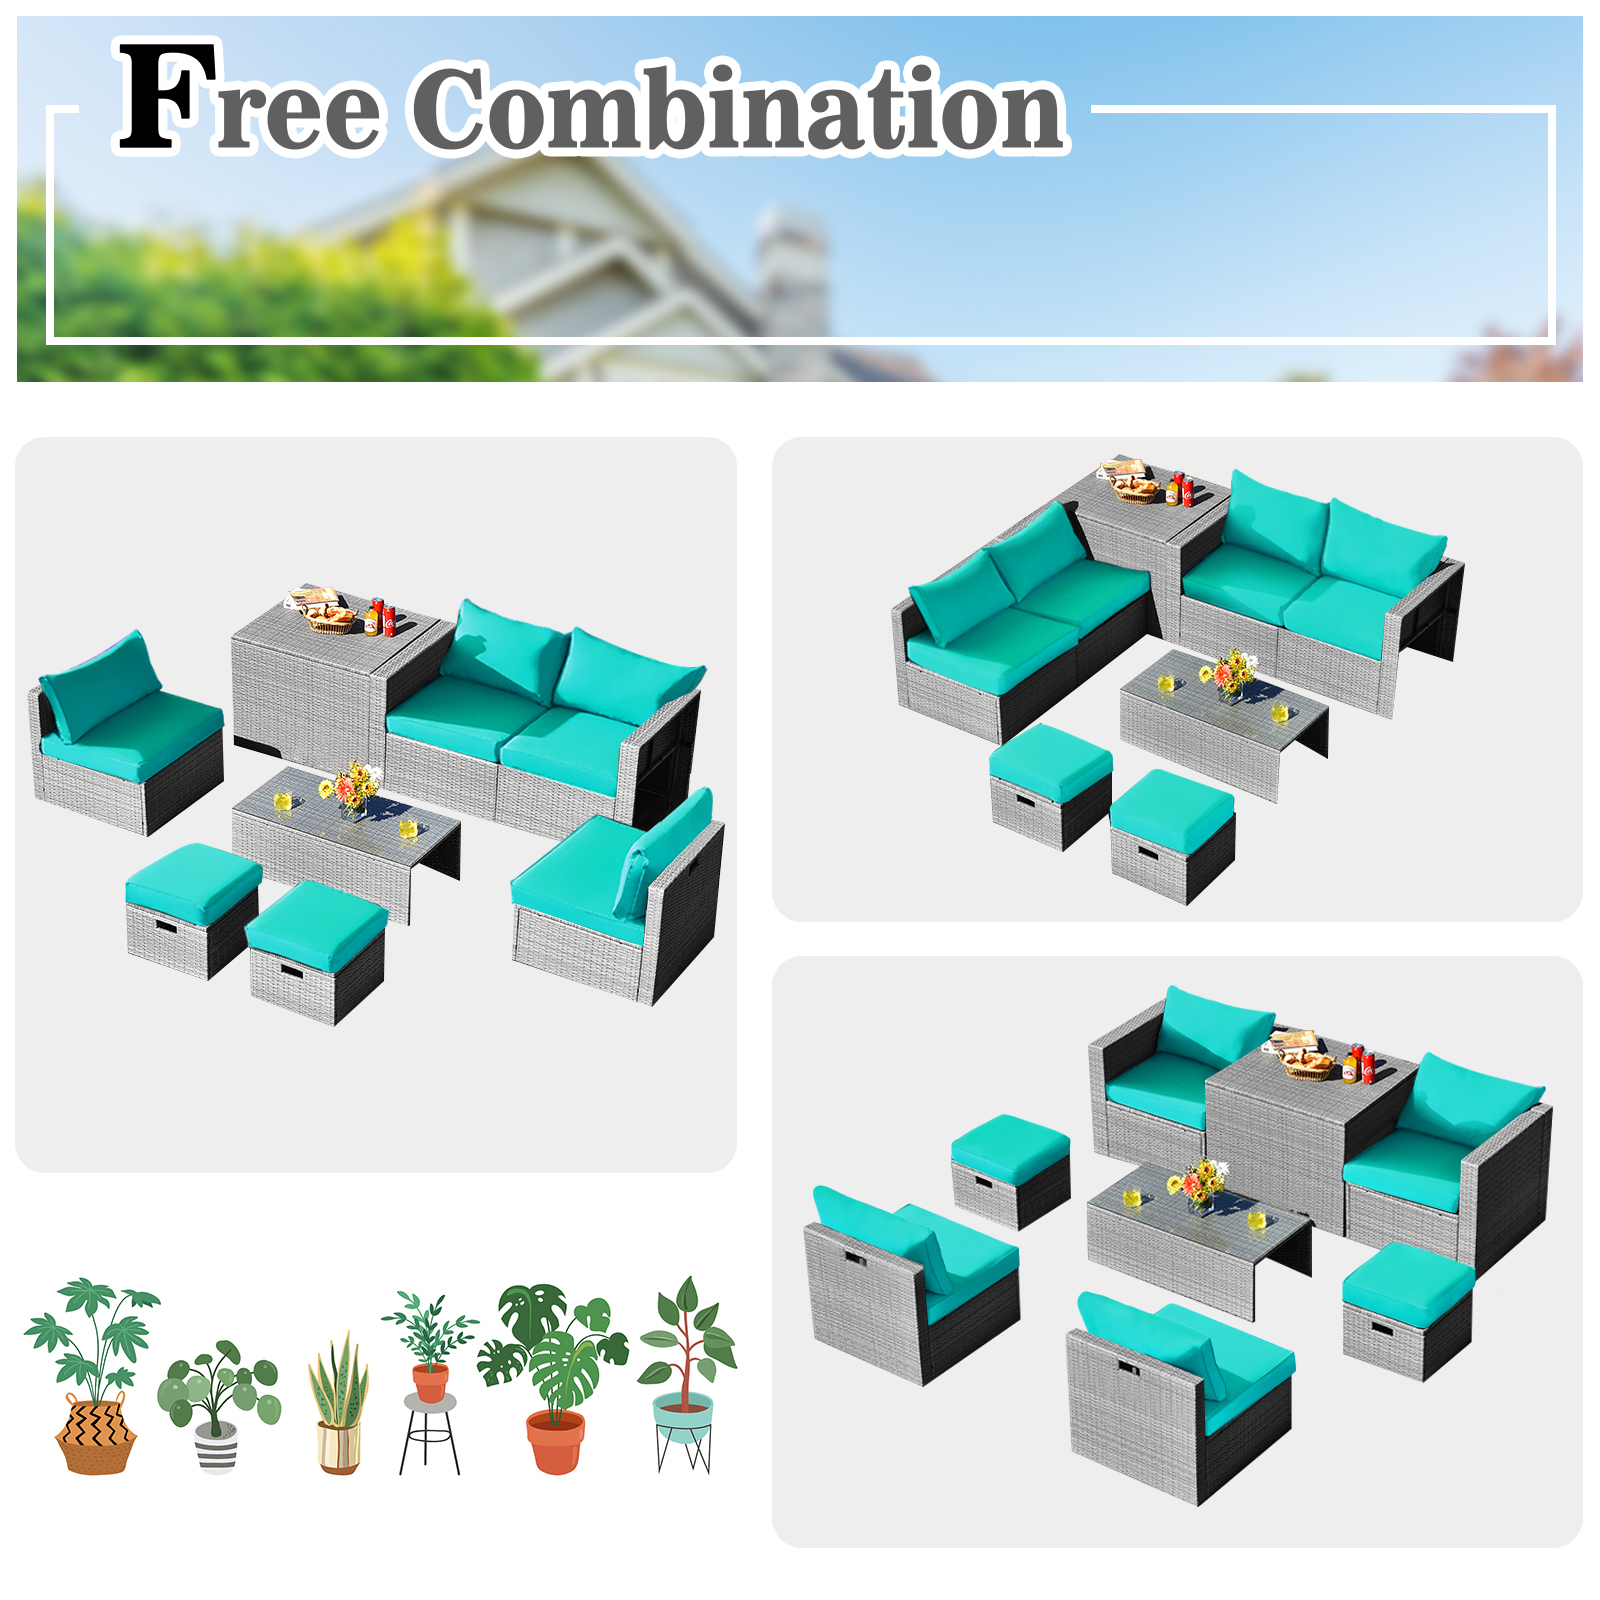 Patiojoy 8 Pieces All-Weather PE Rattan Patio Furniture Set Outdoor Space-Saving Sectional Sofa Set with Storage Box Turquoise - image 3 of 9